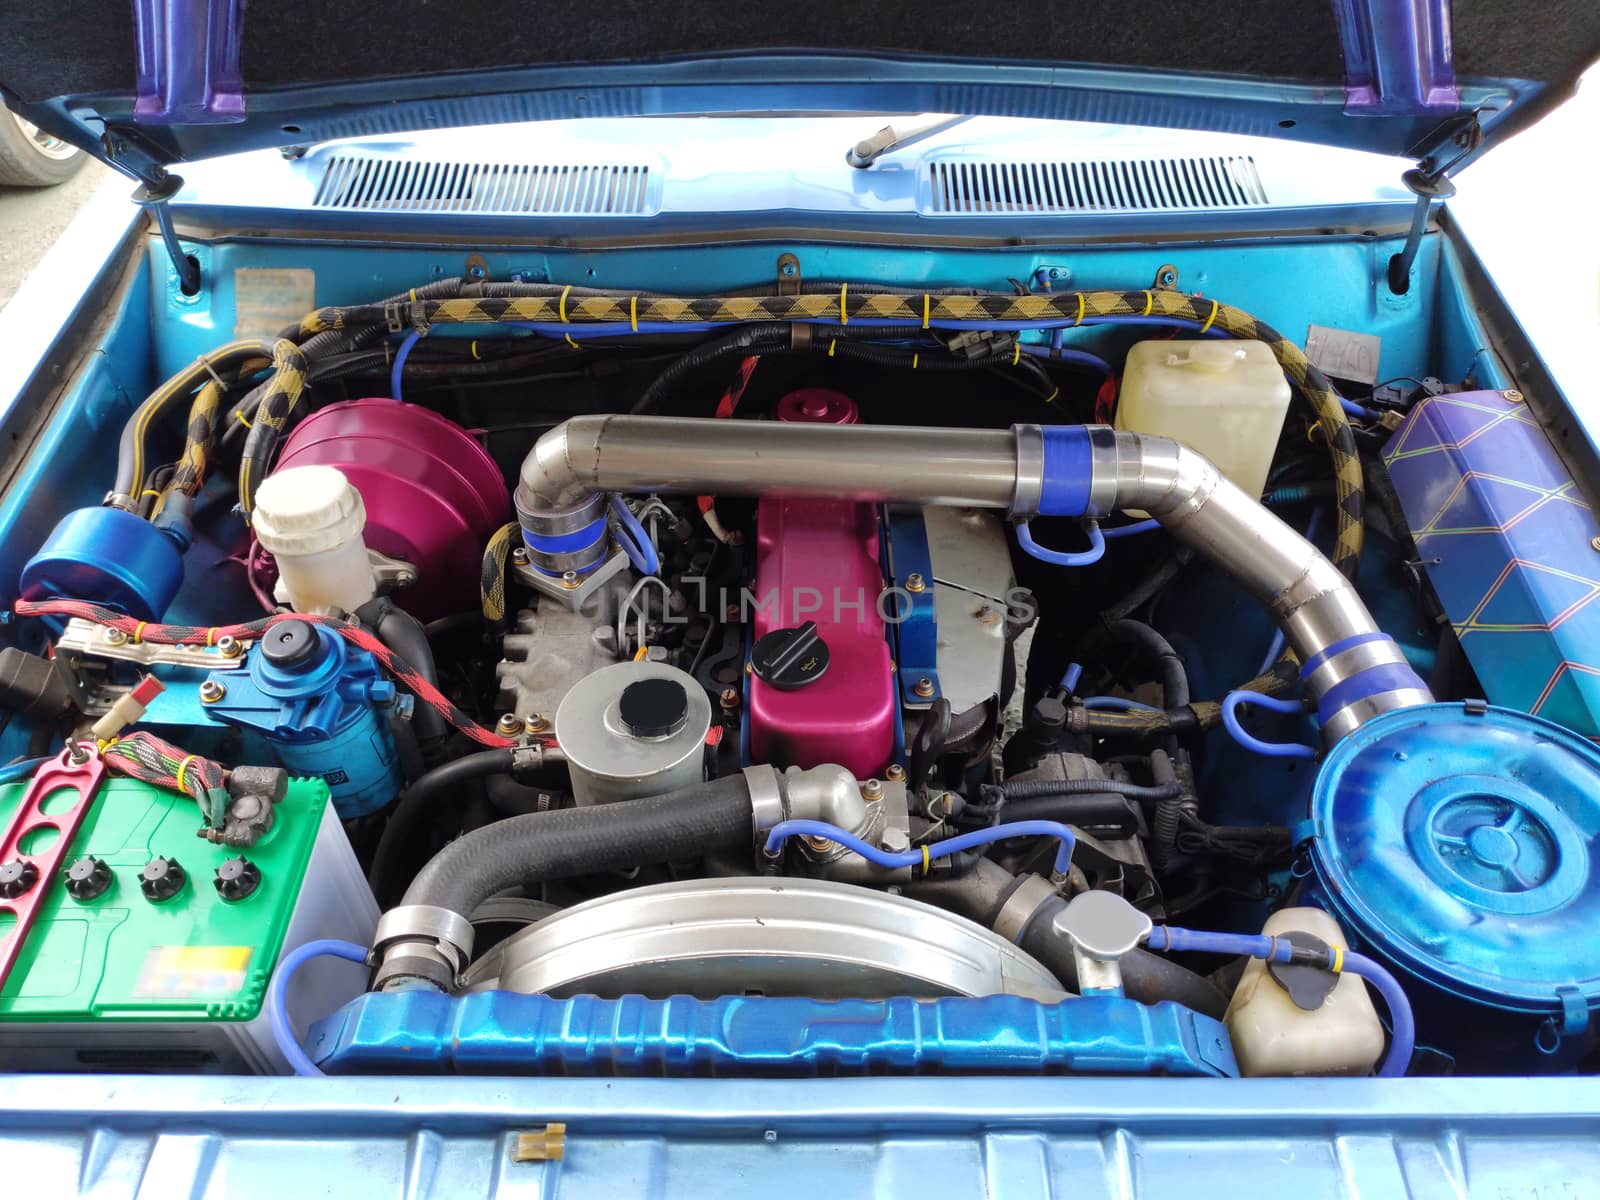 colorful modify engine of the car